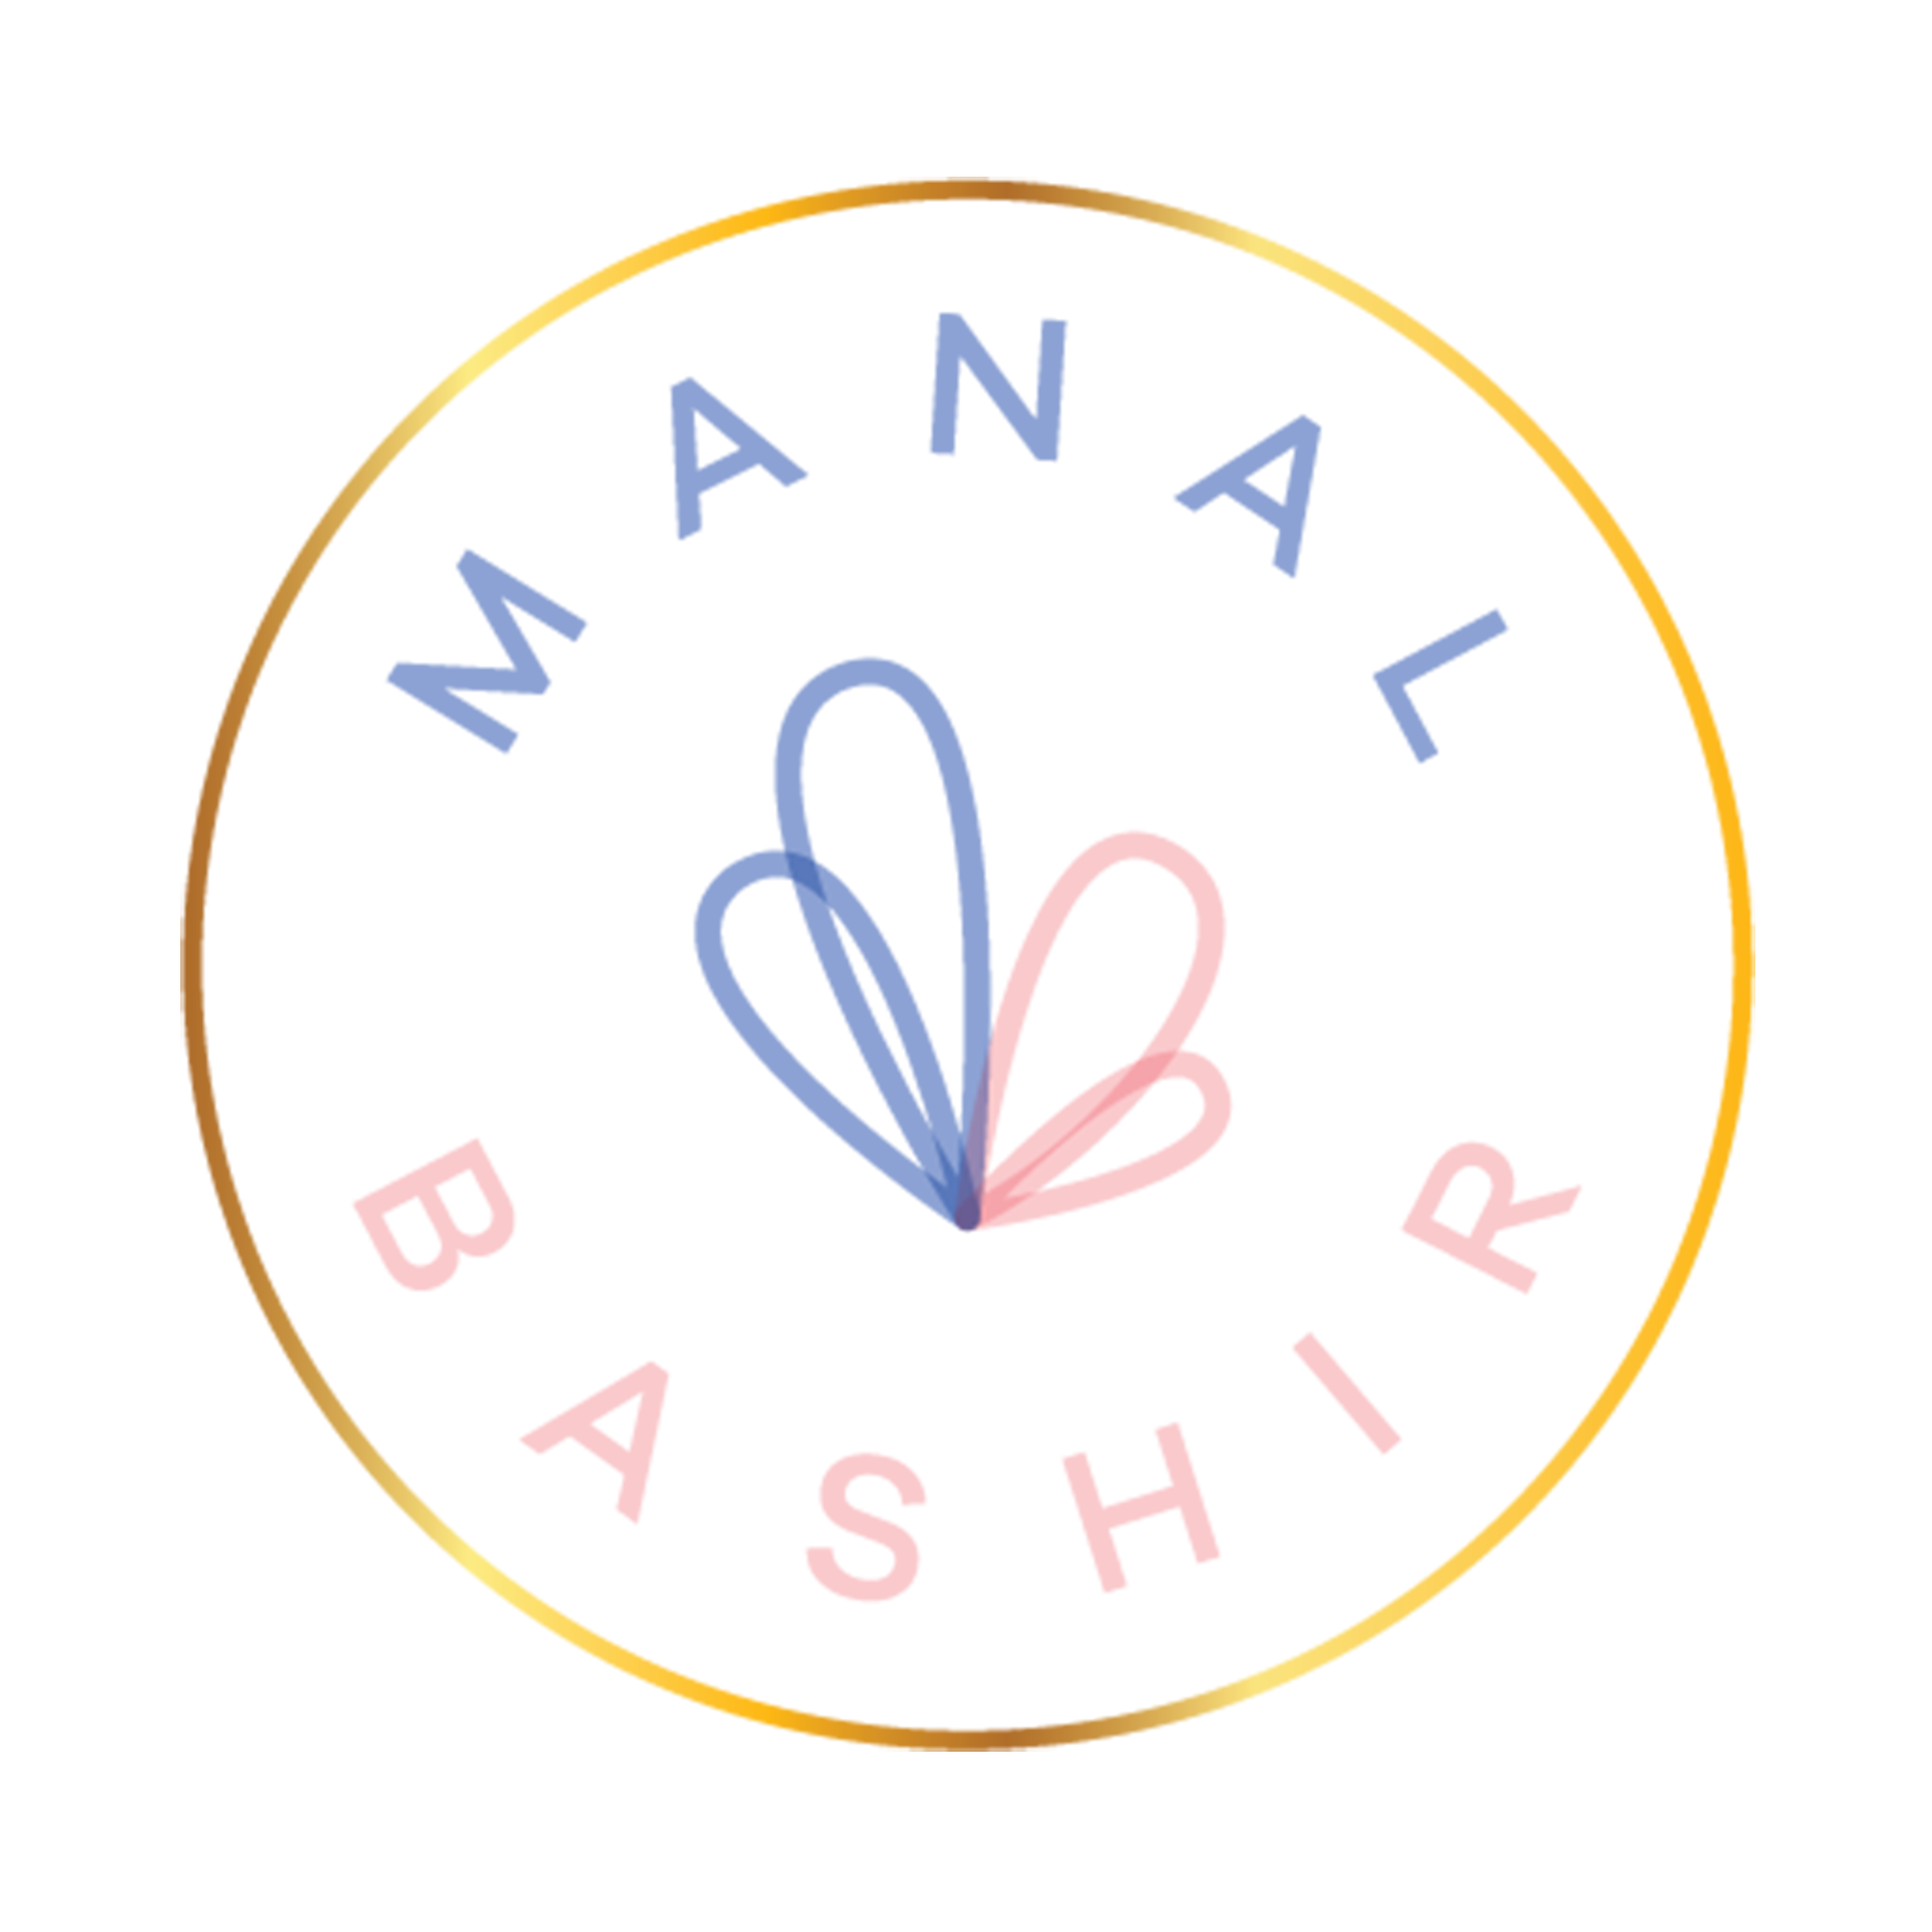 Manal Bashir Pastry Co.